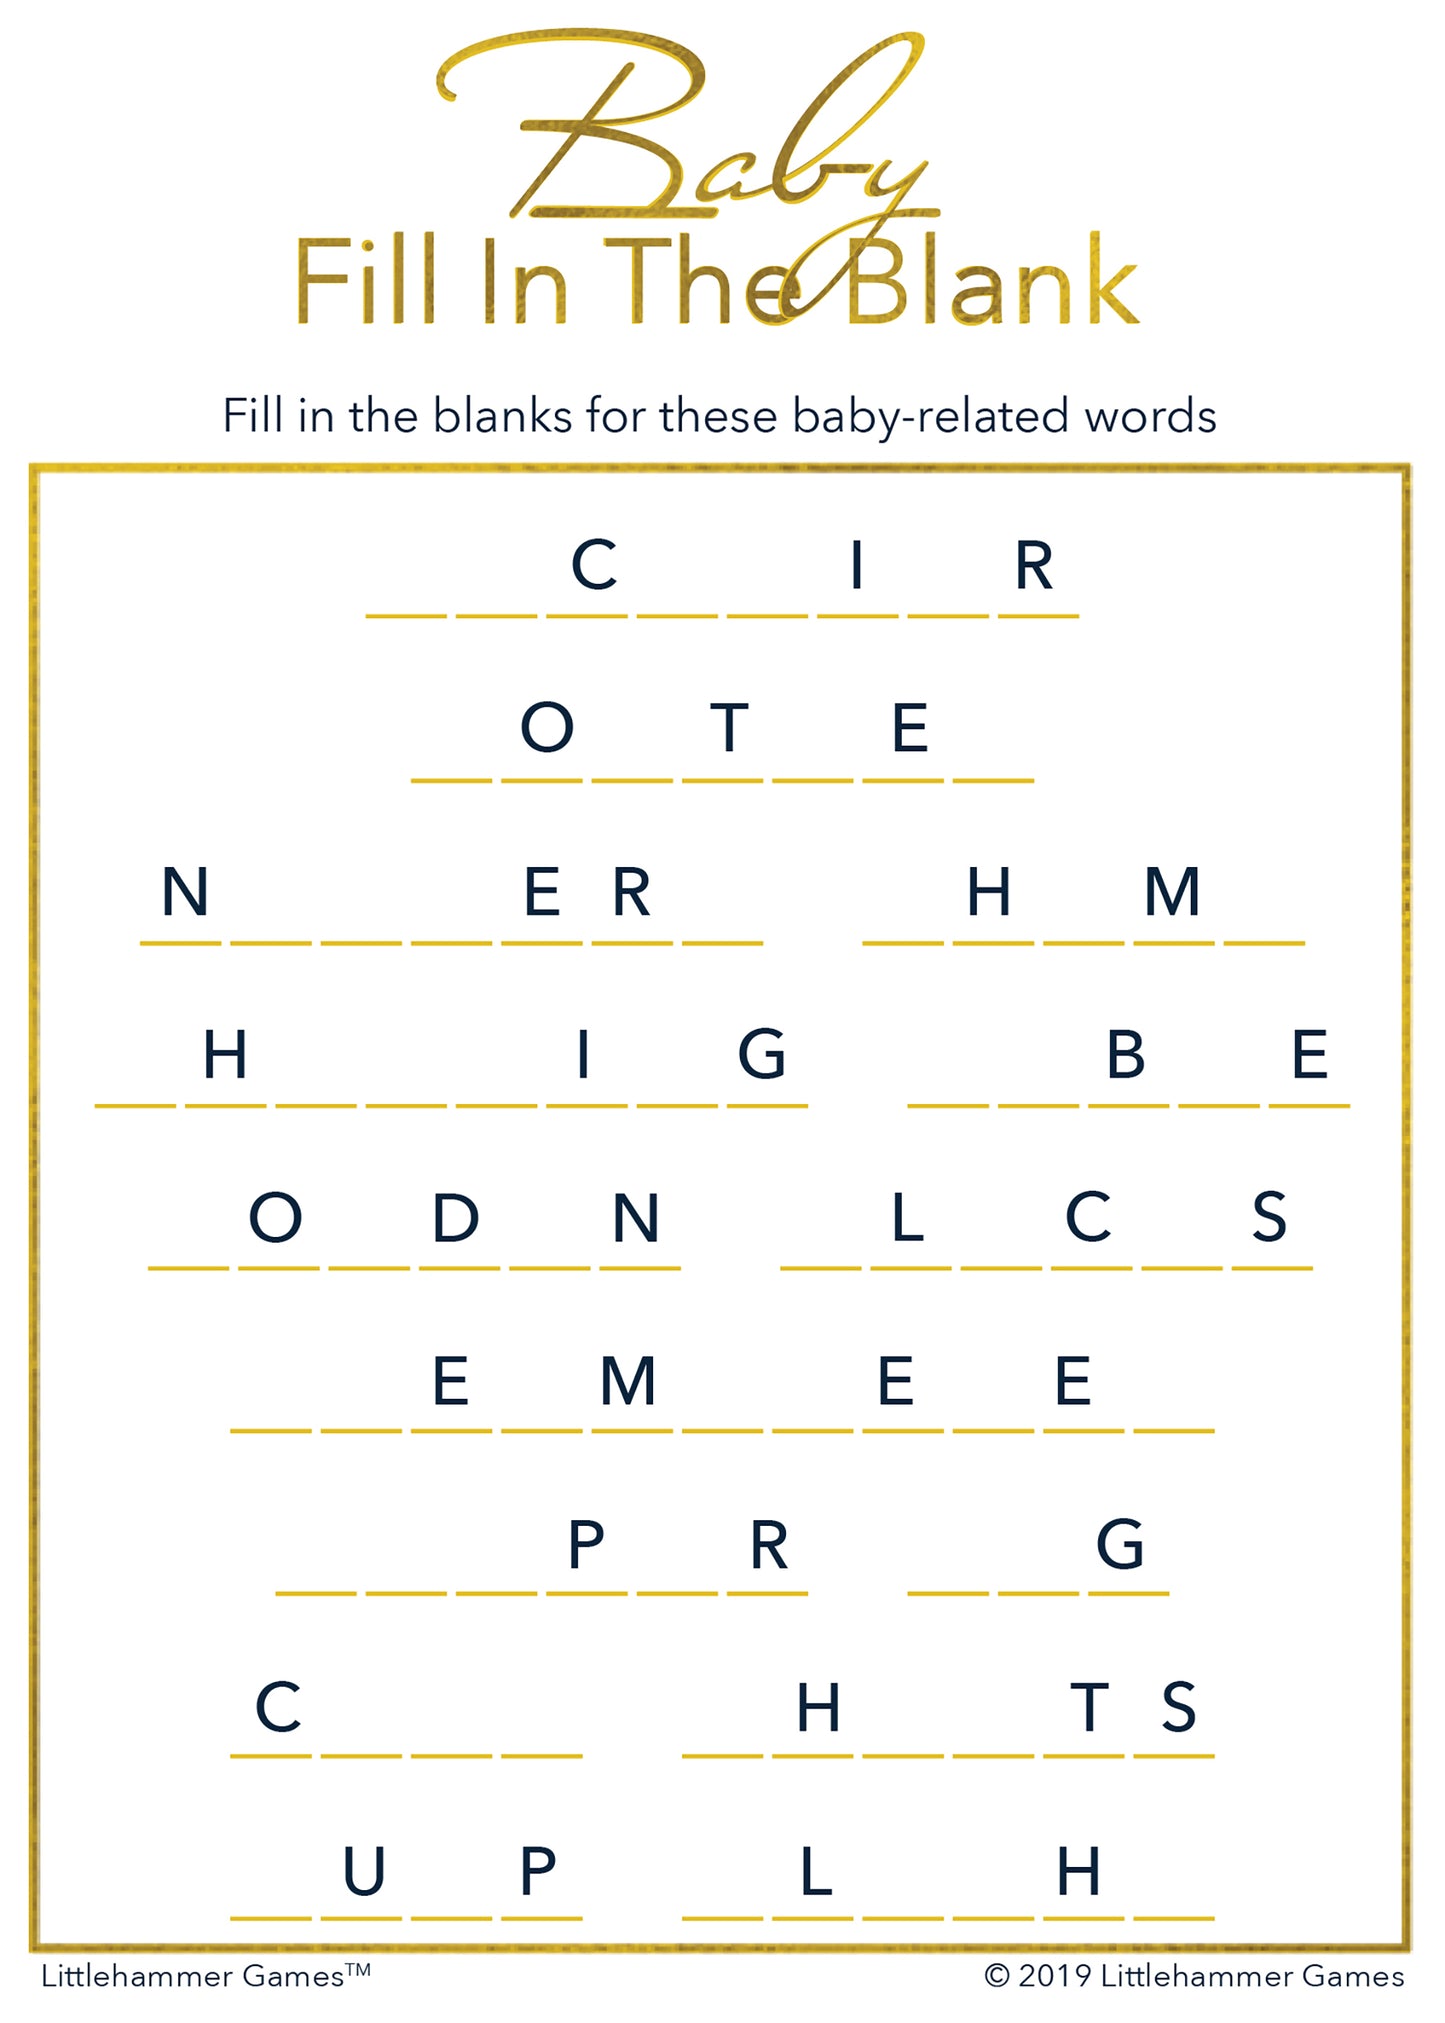 Baby Fill in the Blank game card with gold text on a white background